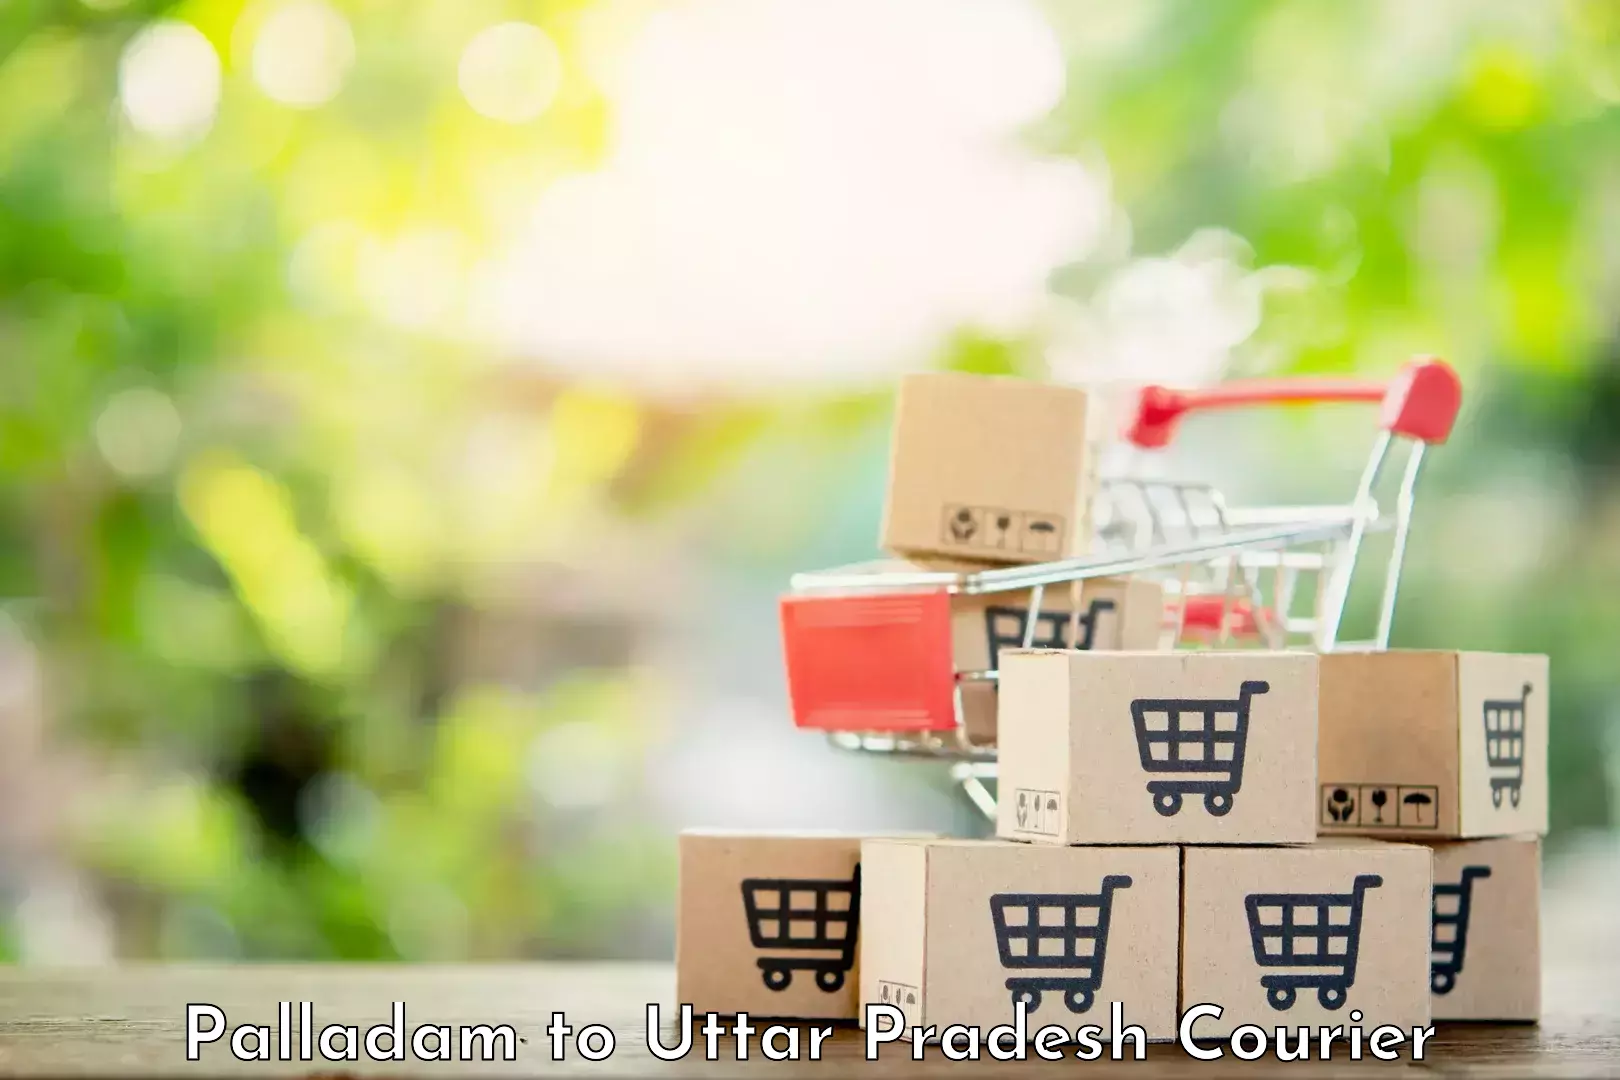 Quality courier services in Palladam to Varanasi